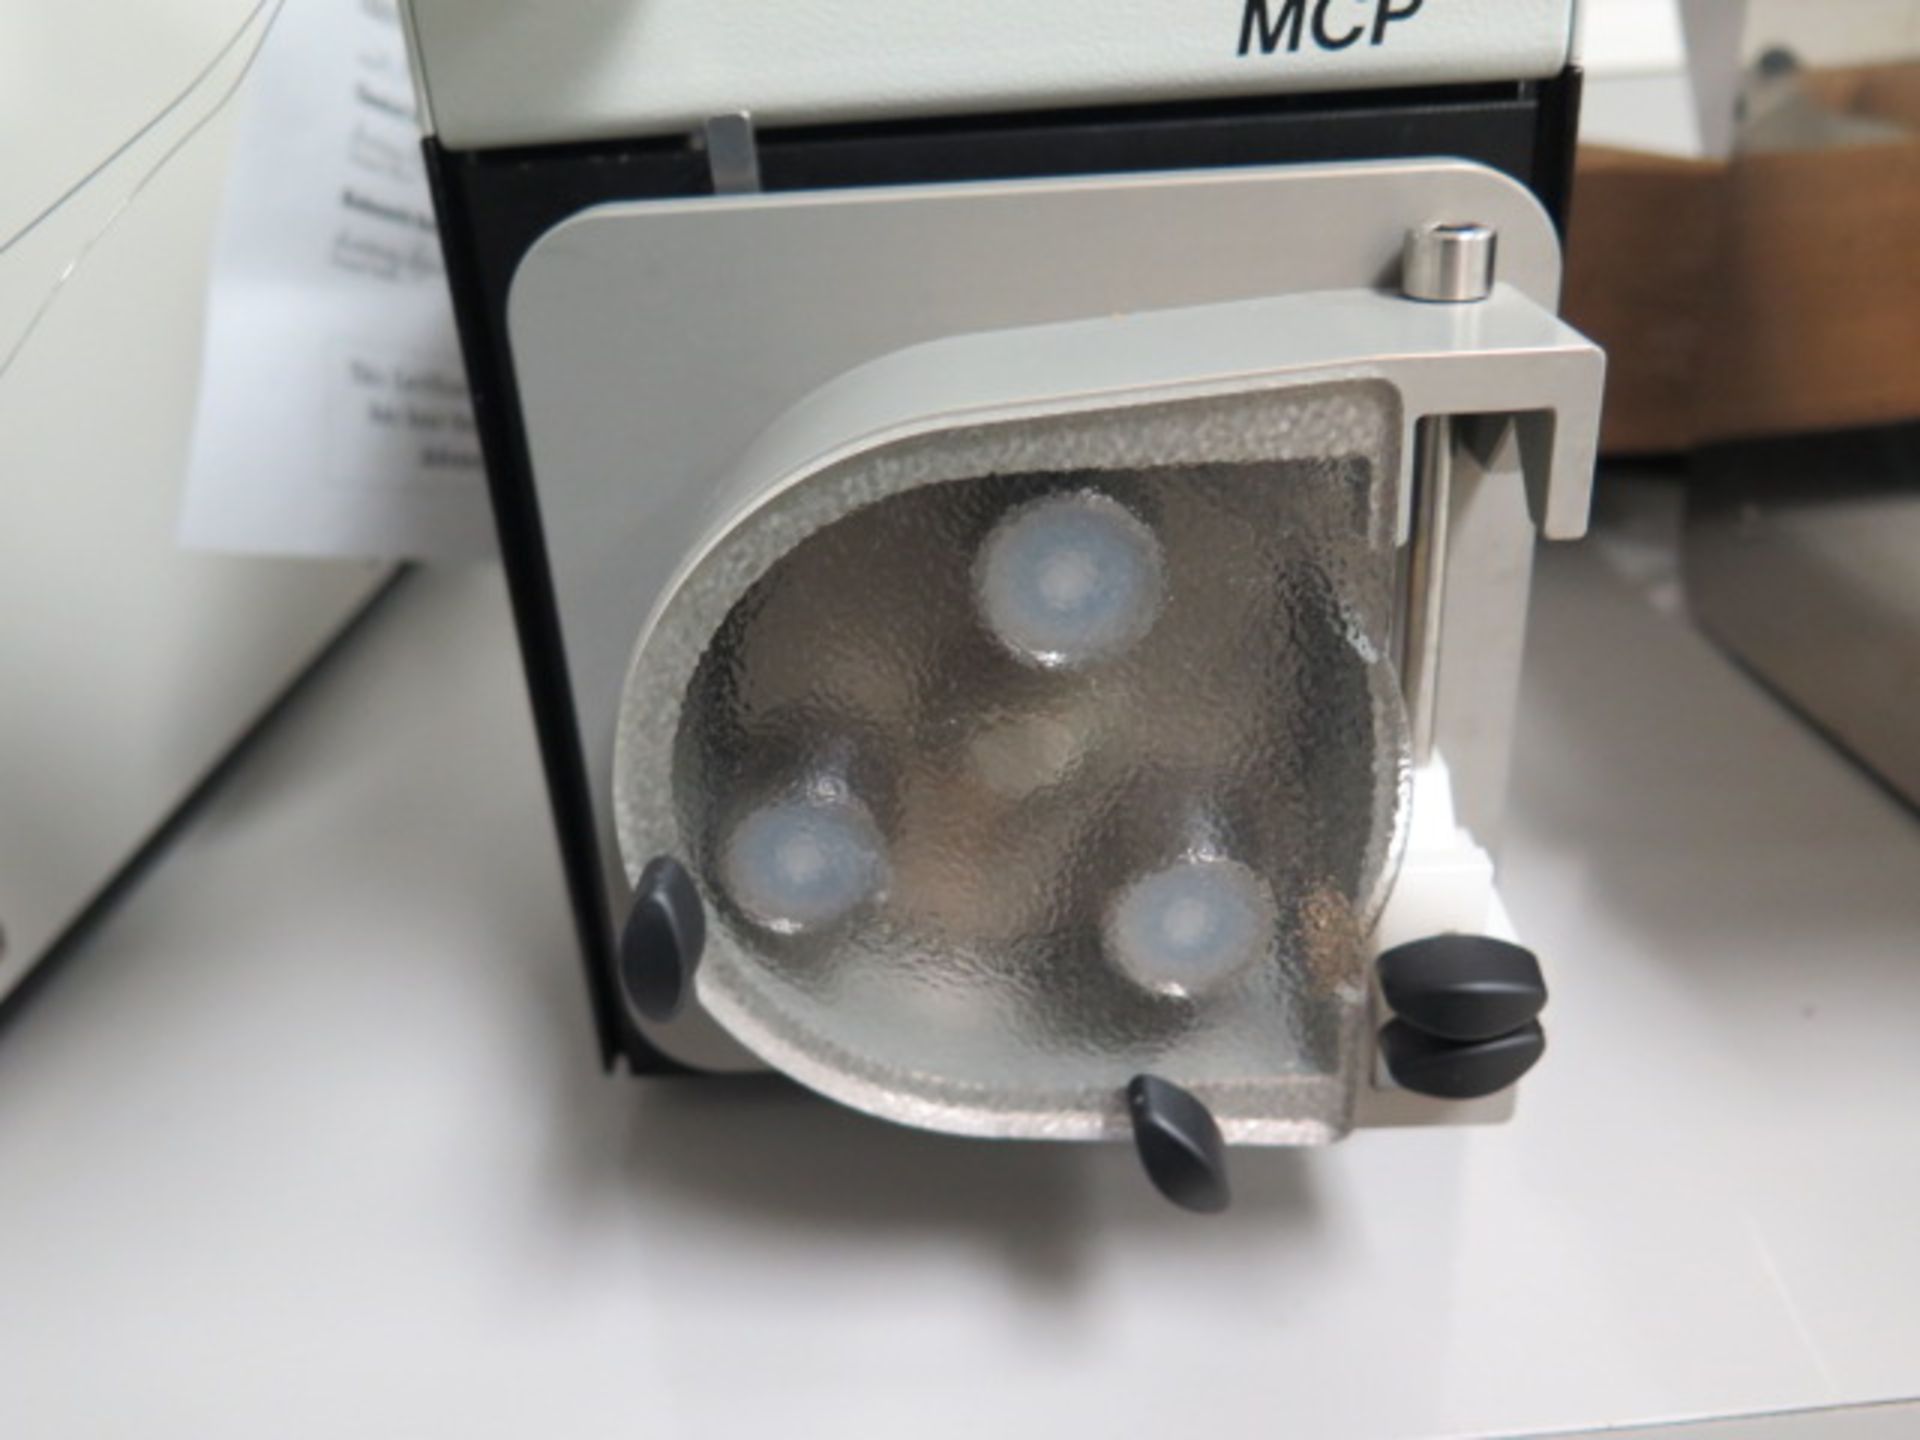 Cole-Parmer mdl. 78-002-22 Peristaltic Pump s/n ISM404-0472 w/ (4) IMS971 Cartridge Pump Heads (SOLD - Image 3 of 7